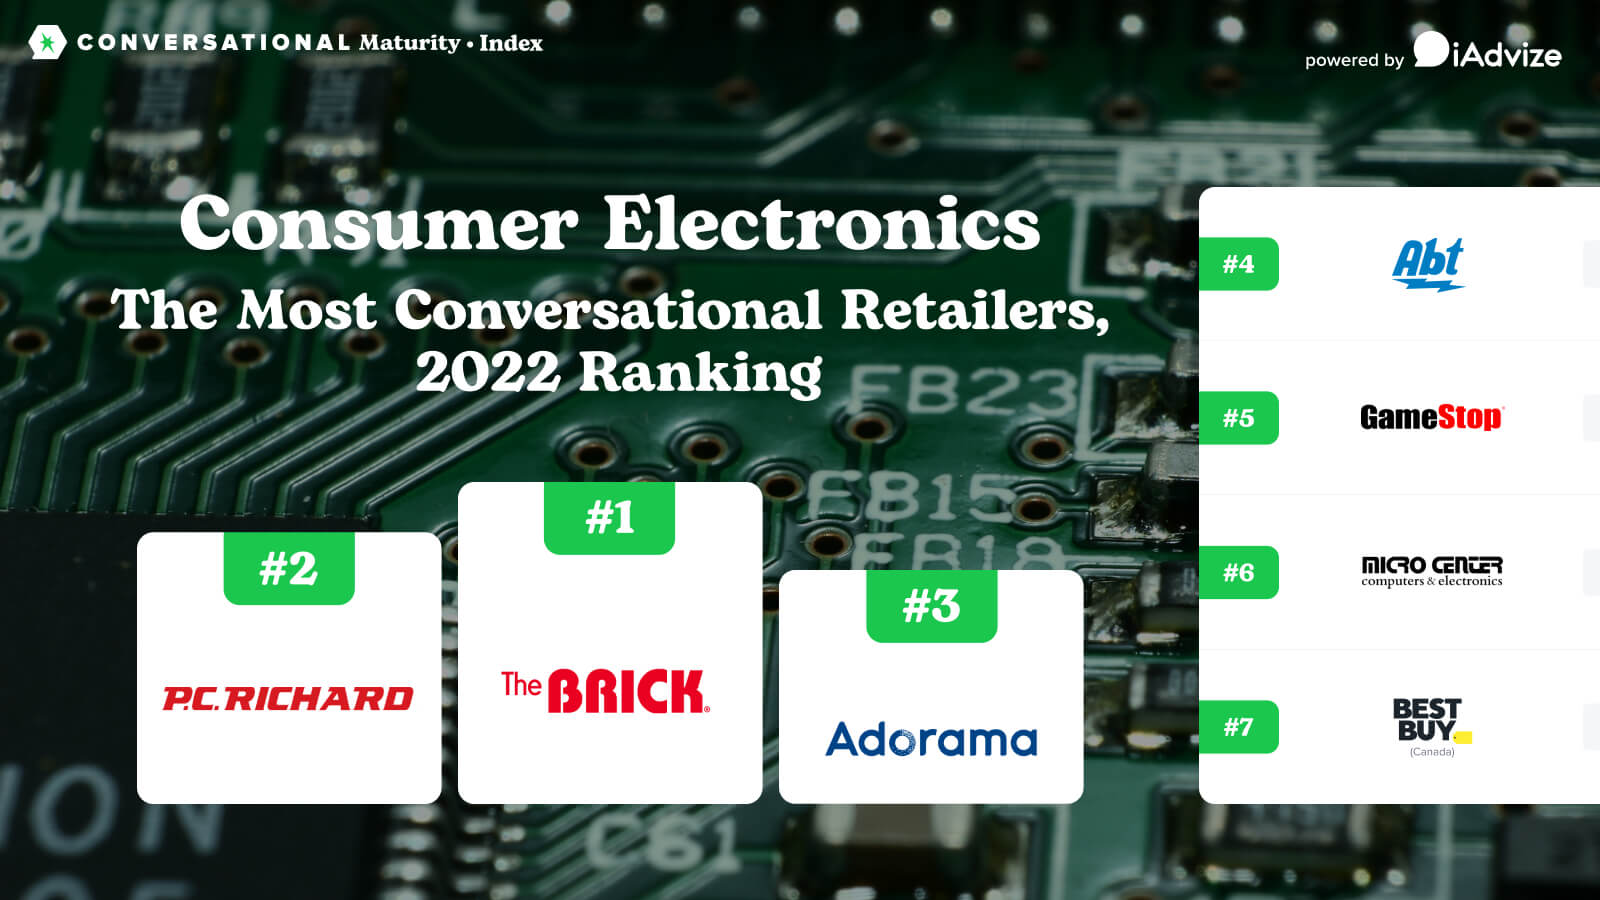  Featured image: Consumer Electronics Conversational Maturity Index 2022 - Read full post: Conversational Maturity Index: Consumer Electronics Retailers 2022 Ranking